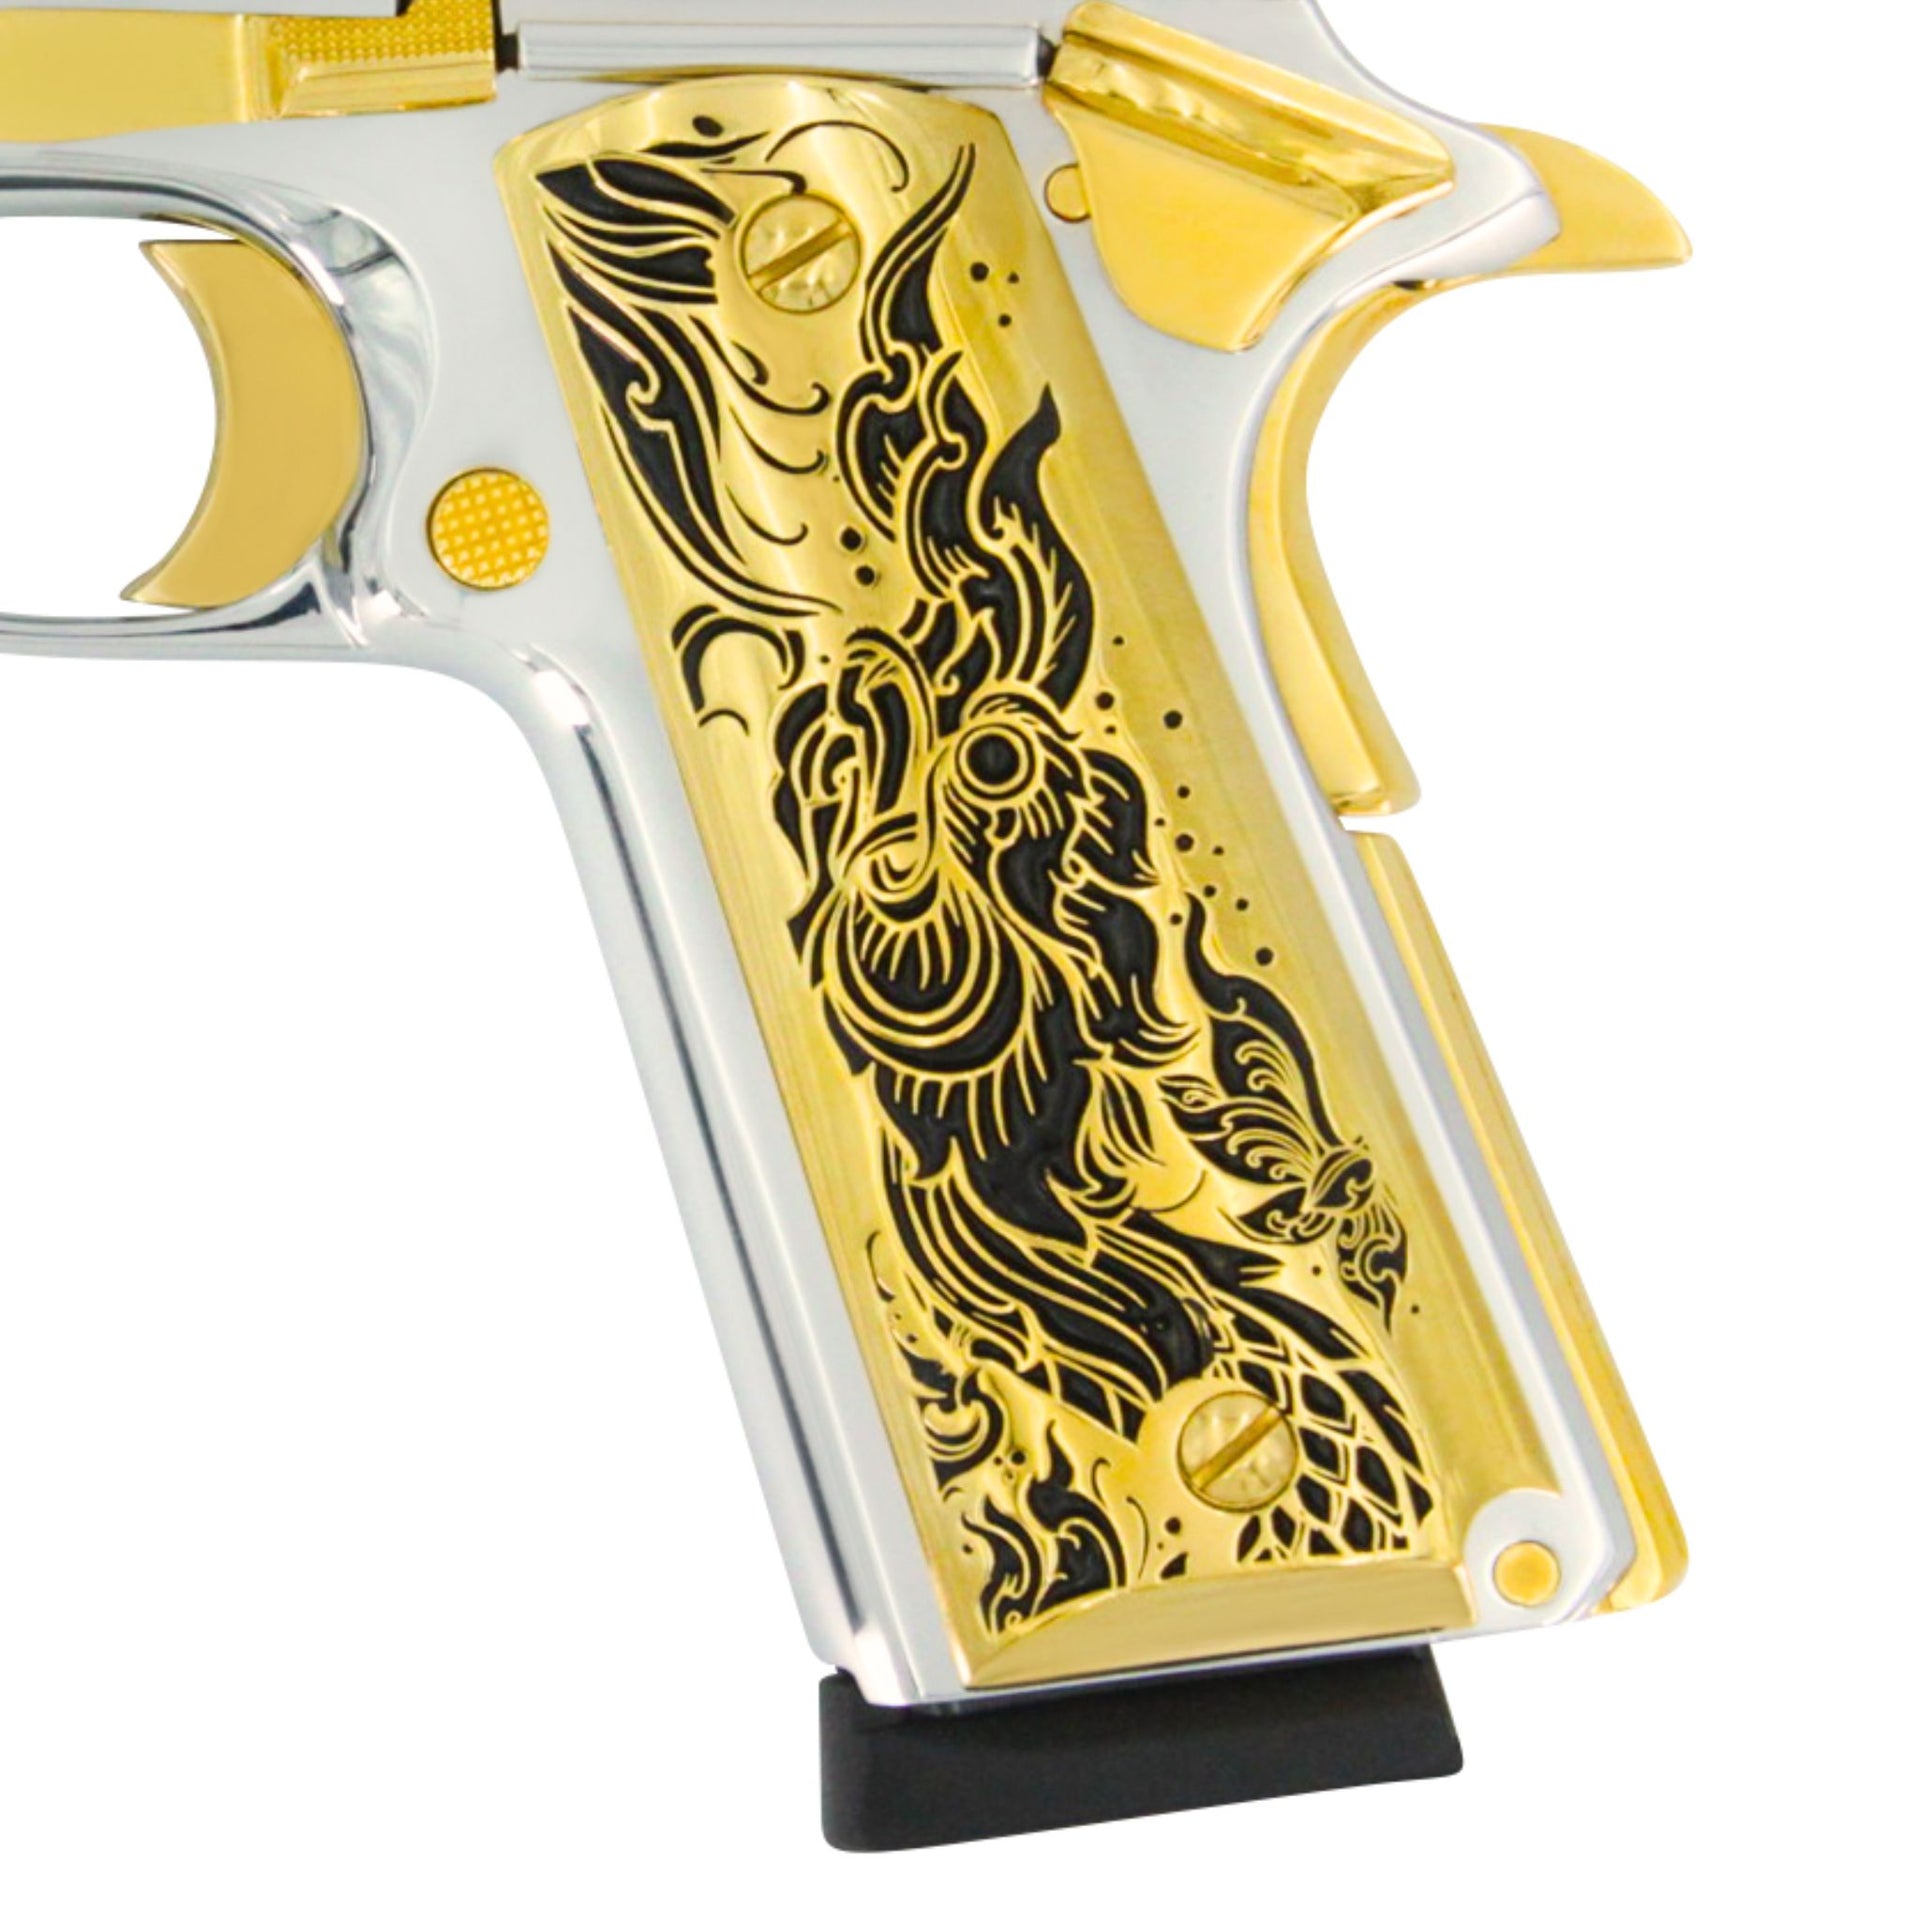 Custom Grips in 24K Gold in the Naga Warrior Design by Seattle Engraving Center